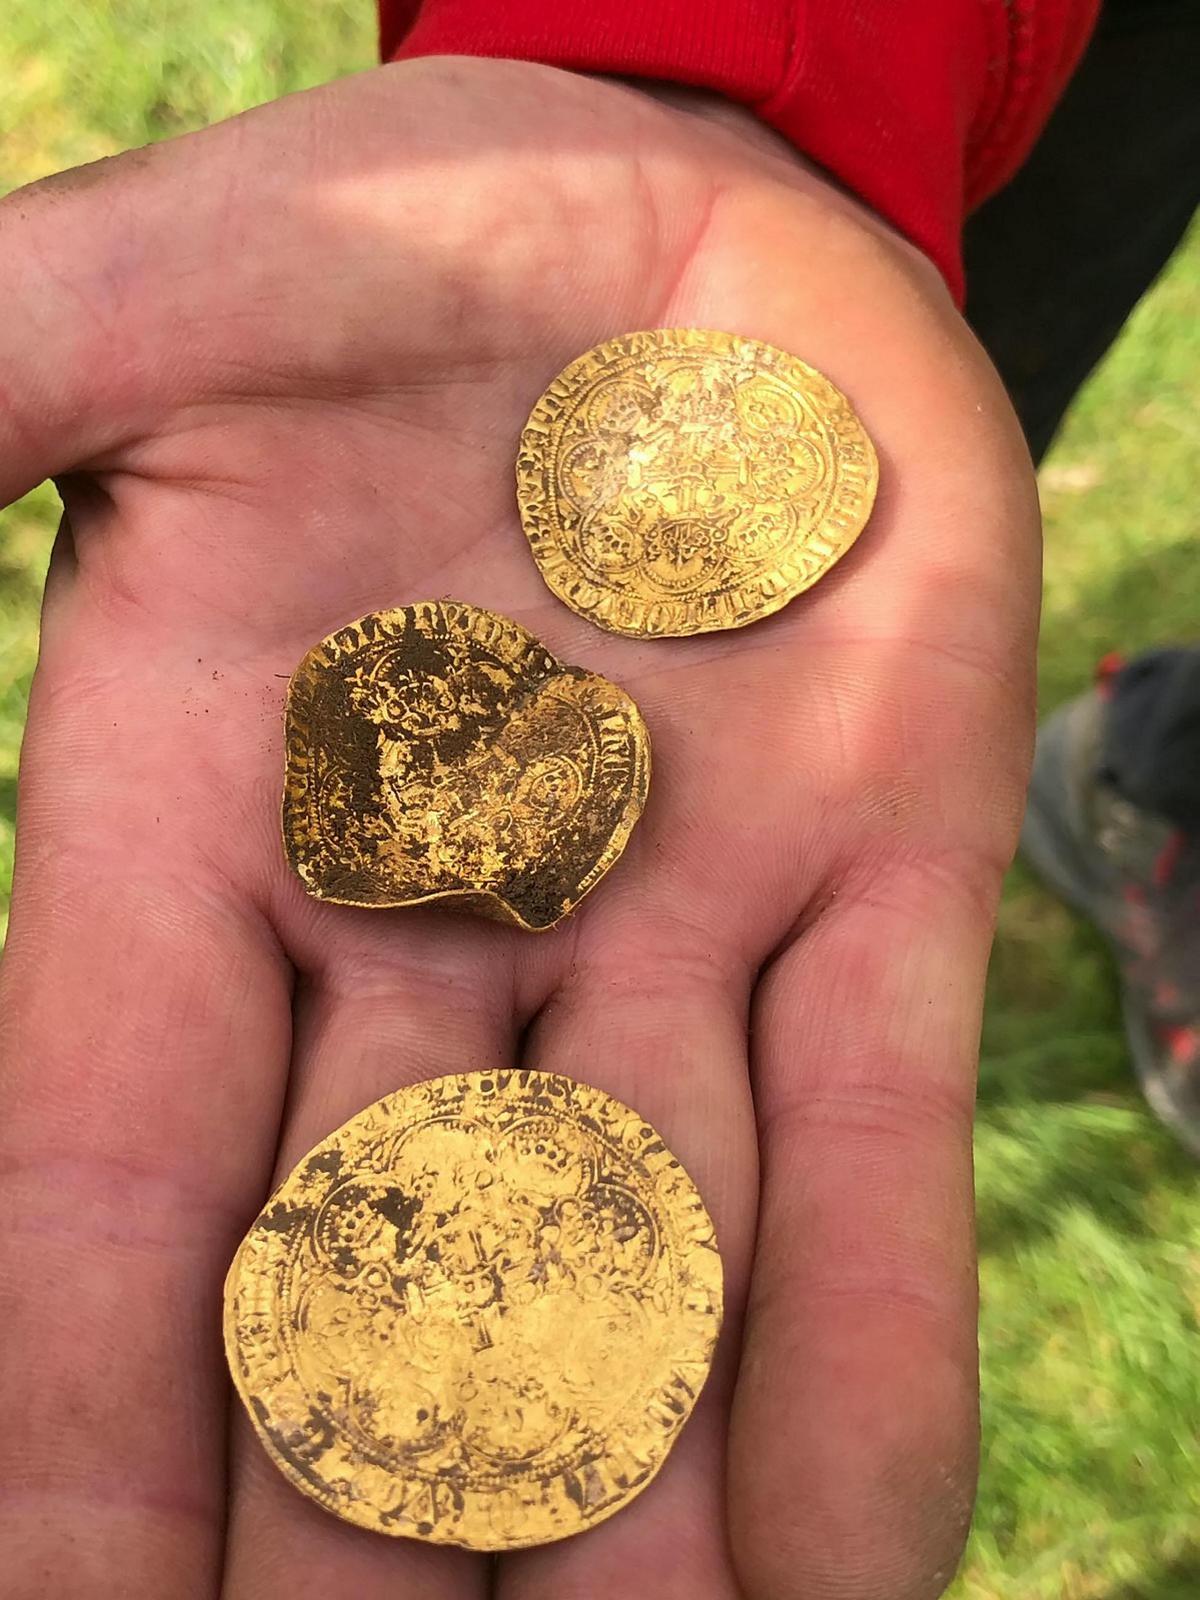 Three ultra-rare gold nobles found at the site in Buckinghamshire. (SWNS)